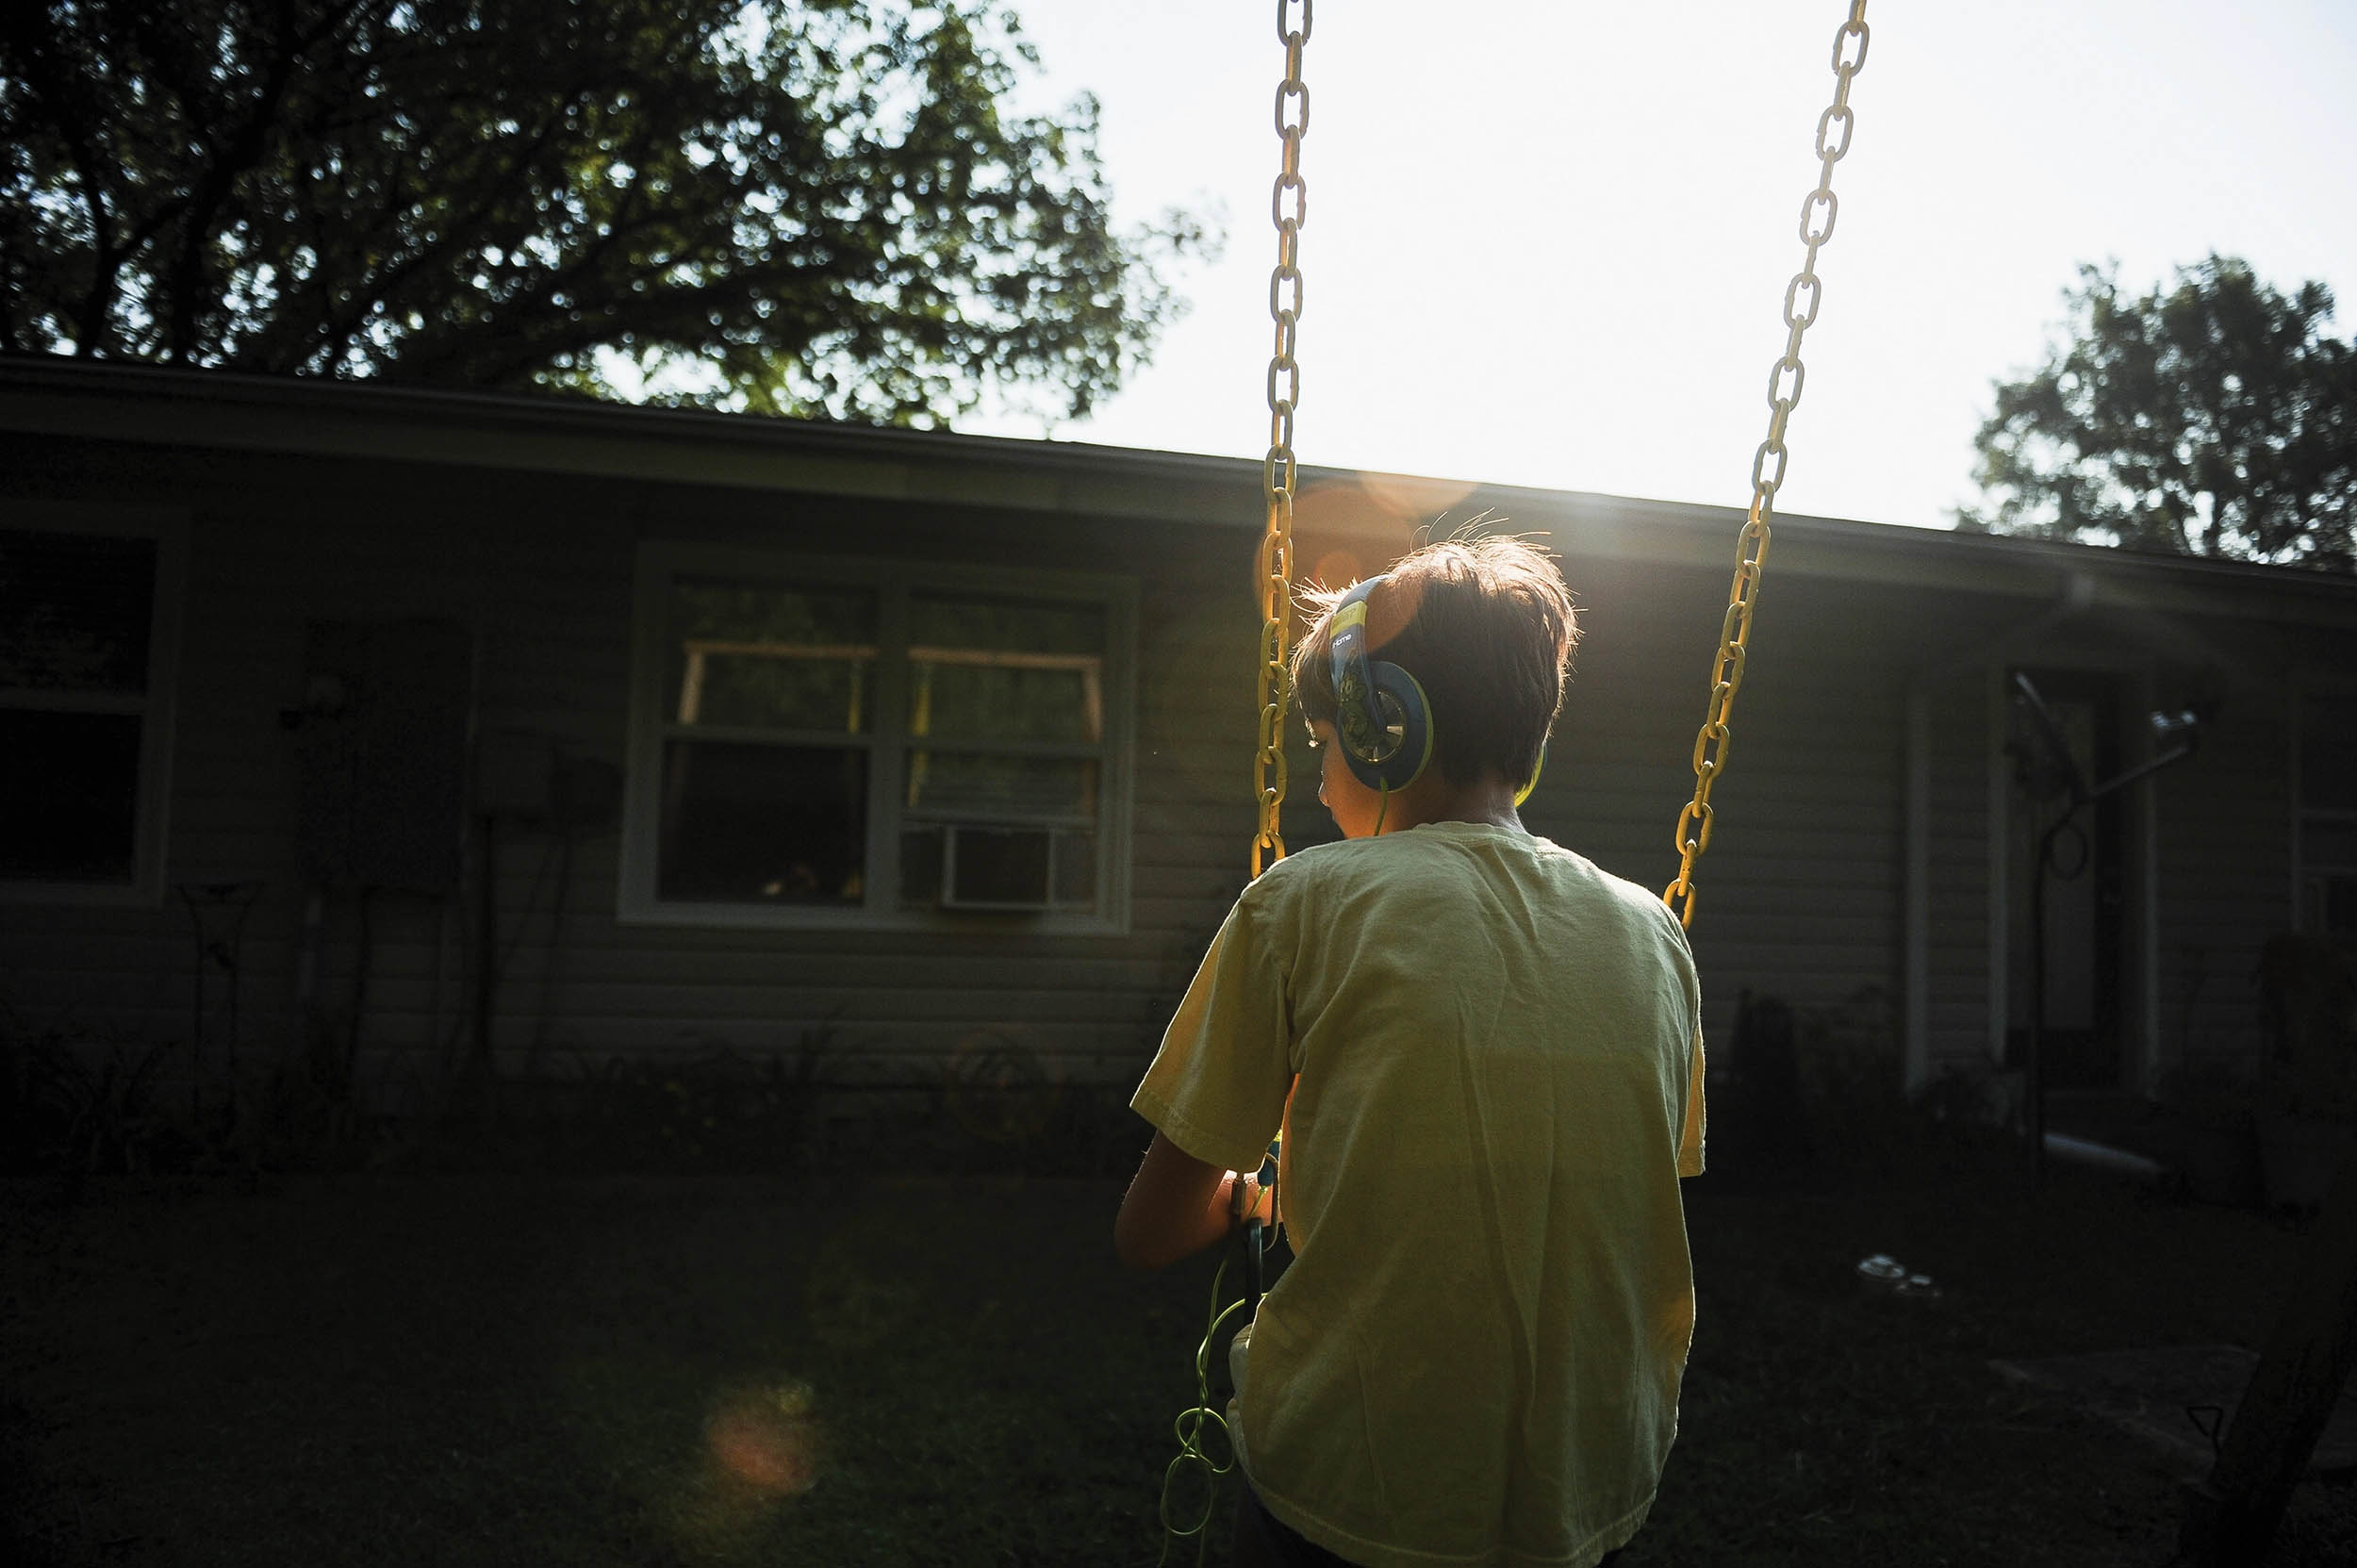 Morgan Jungk, daughter of Master Sergeant Beth Jungk, 19th Communications Squadron plans and programs manager, has autism and other complex needs as she swings in her backyard on August 24, 2013, in Jacksonville, Arkansas (U.S. Air Force/Jake Barreiro)